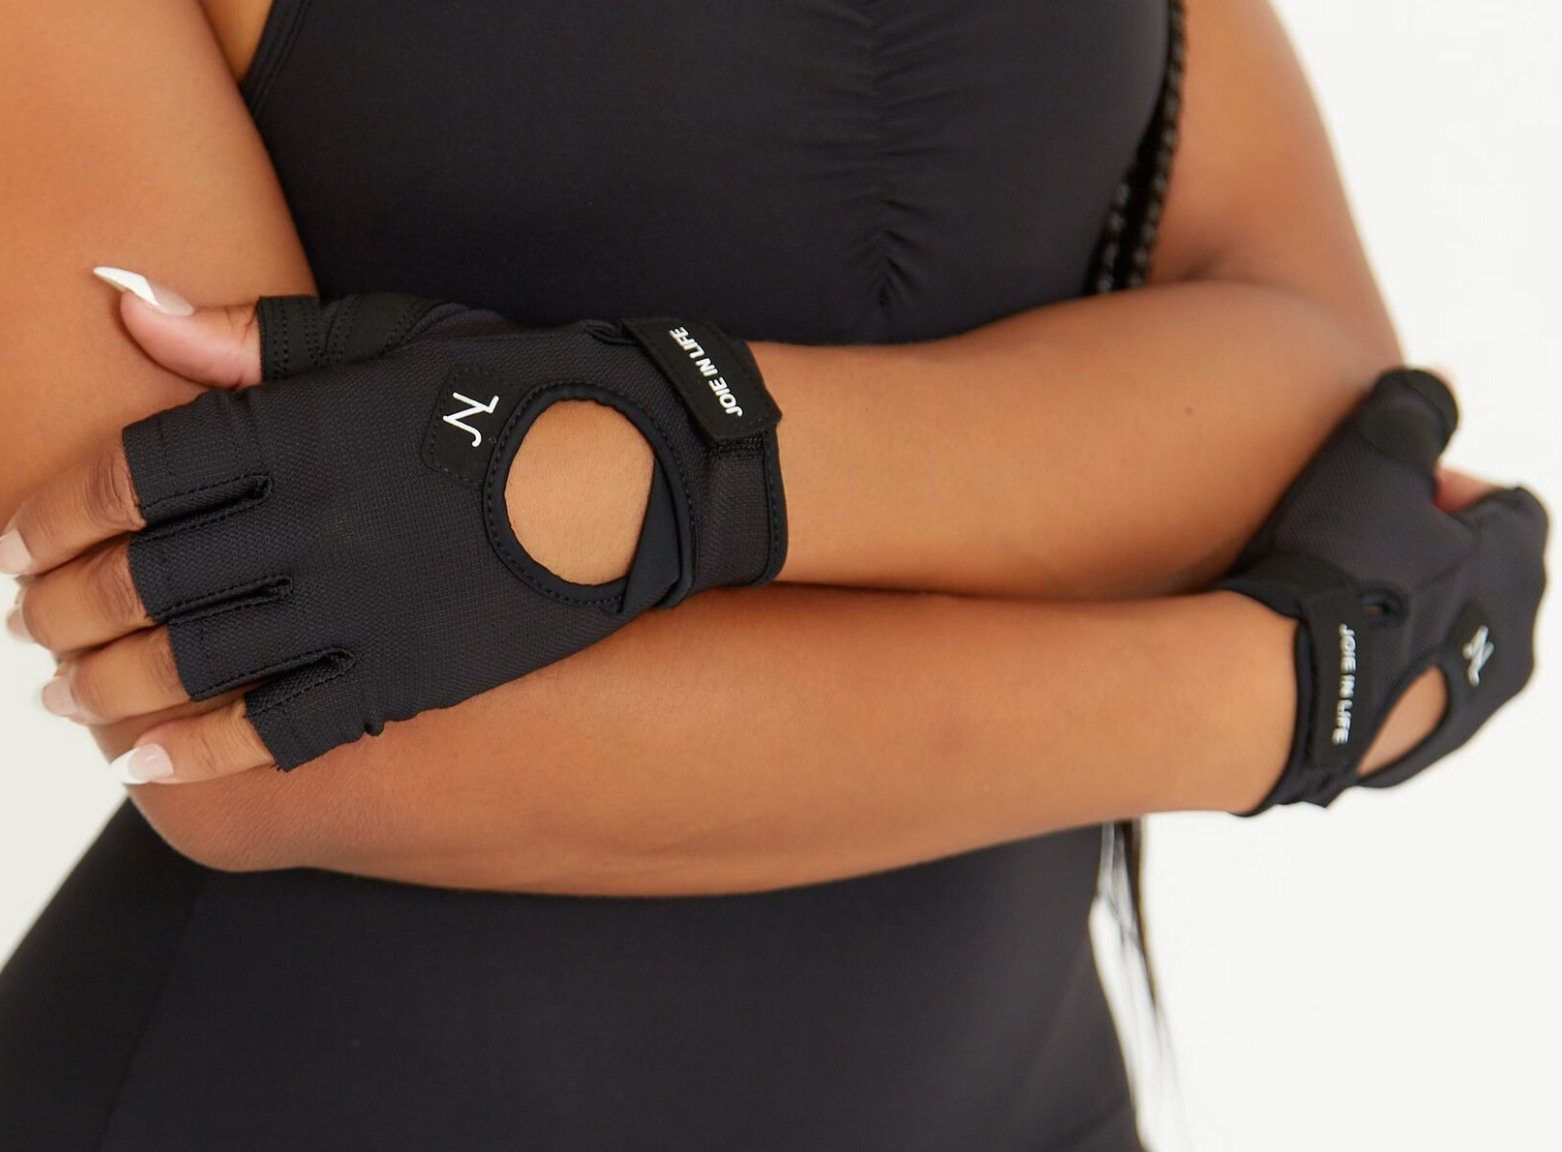 7 Fitness Products To Amp Up Your Home Workouts